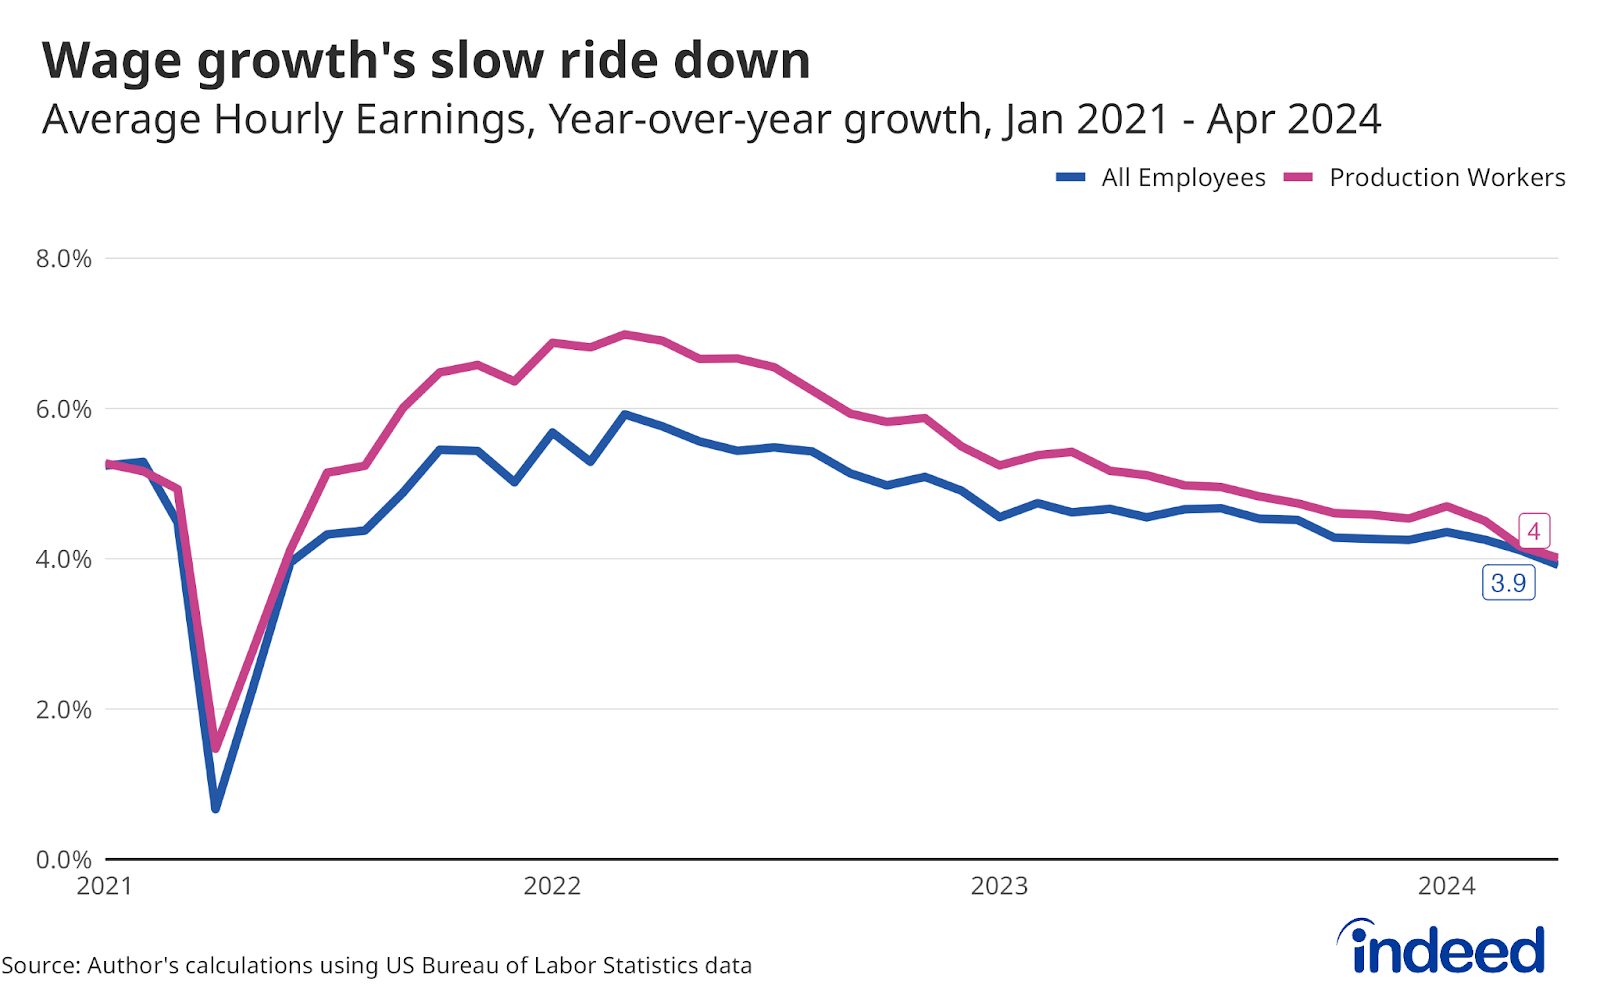 A line graph titled “Wage growth’s slow ride down” showing the year-over-year growth in average hourly earnings for all workers and production workers. Both series have been steadily slowing down since early 2022 and are now growing at a roughly 4 percent pace.